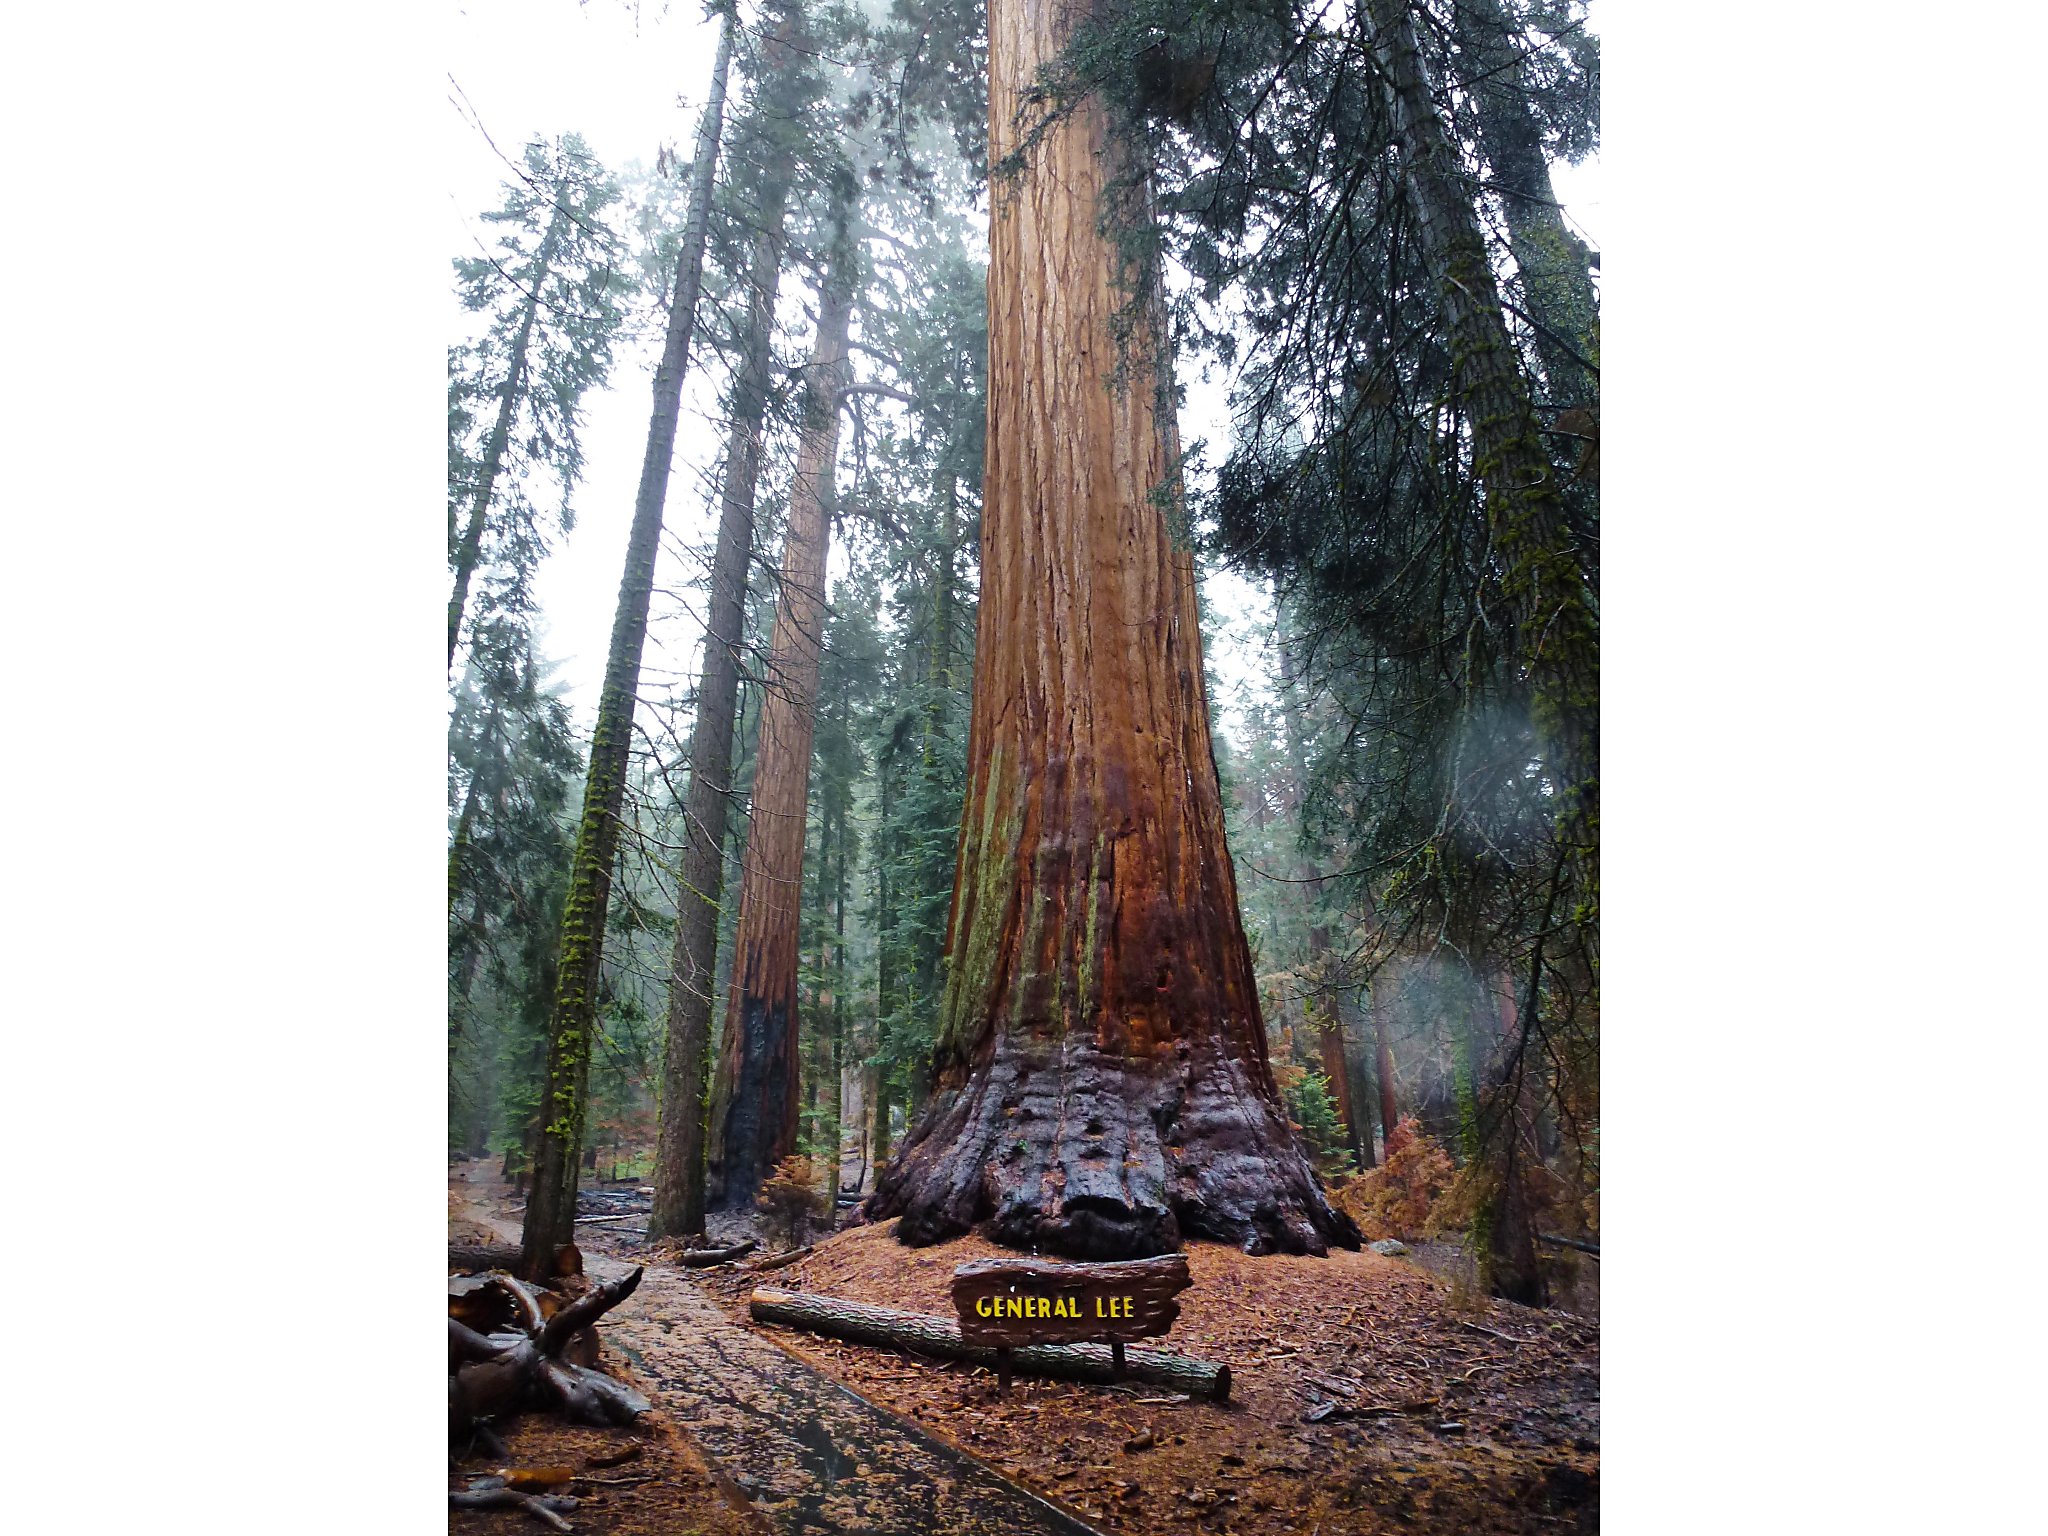 National Park Service removes Robert E. Lee's name from giant sequoia